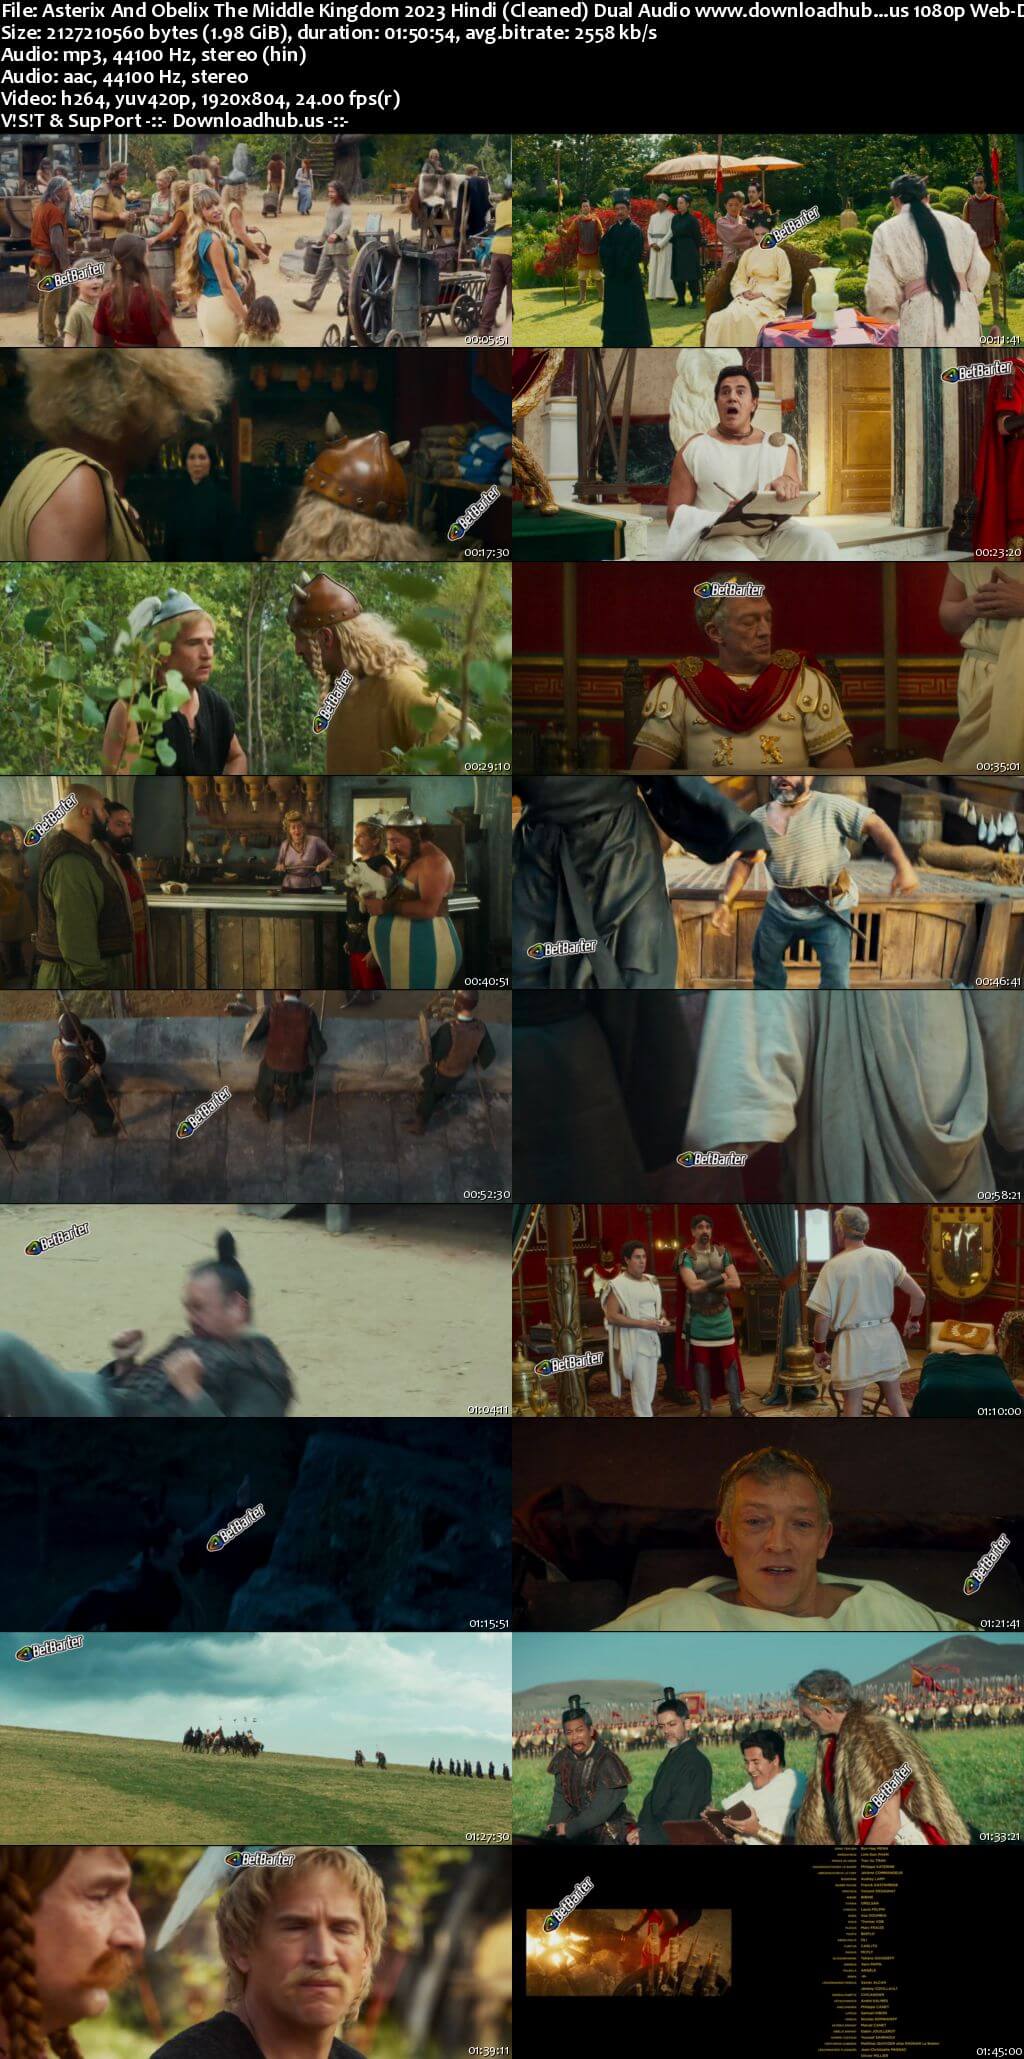 Asterix And Obelix The Middle Kingdom 2023 Hindi (Cleaned) Dual Audio 1080p 720p 480p Web-DL